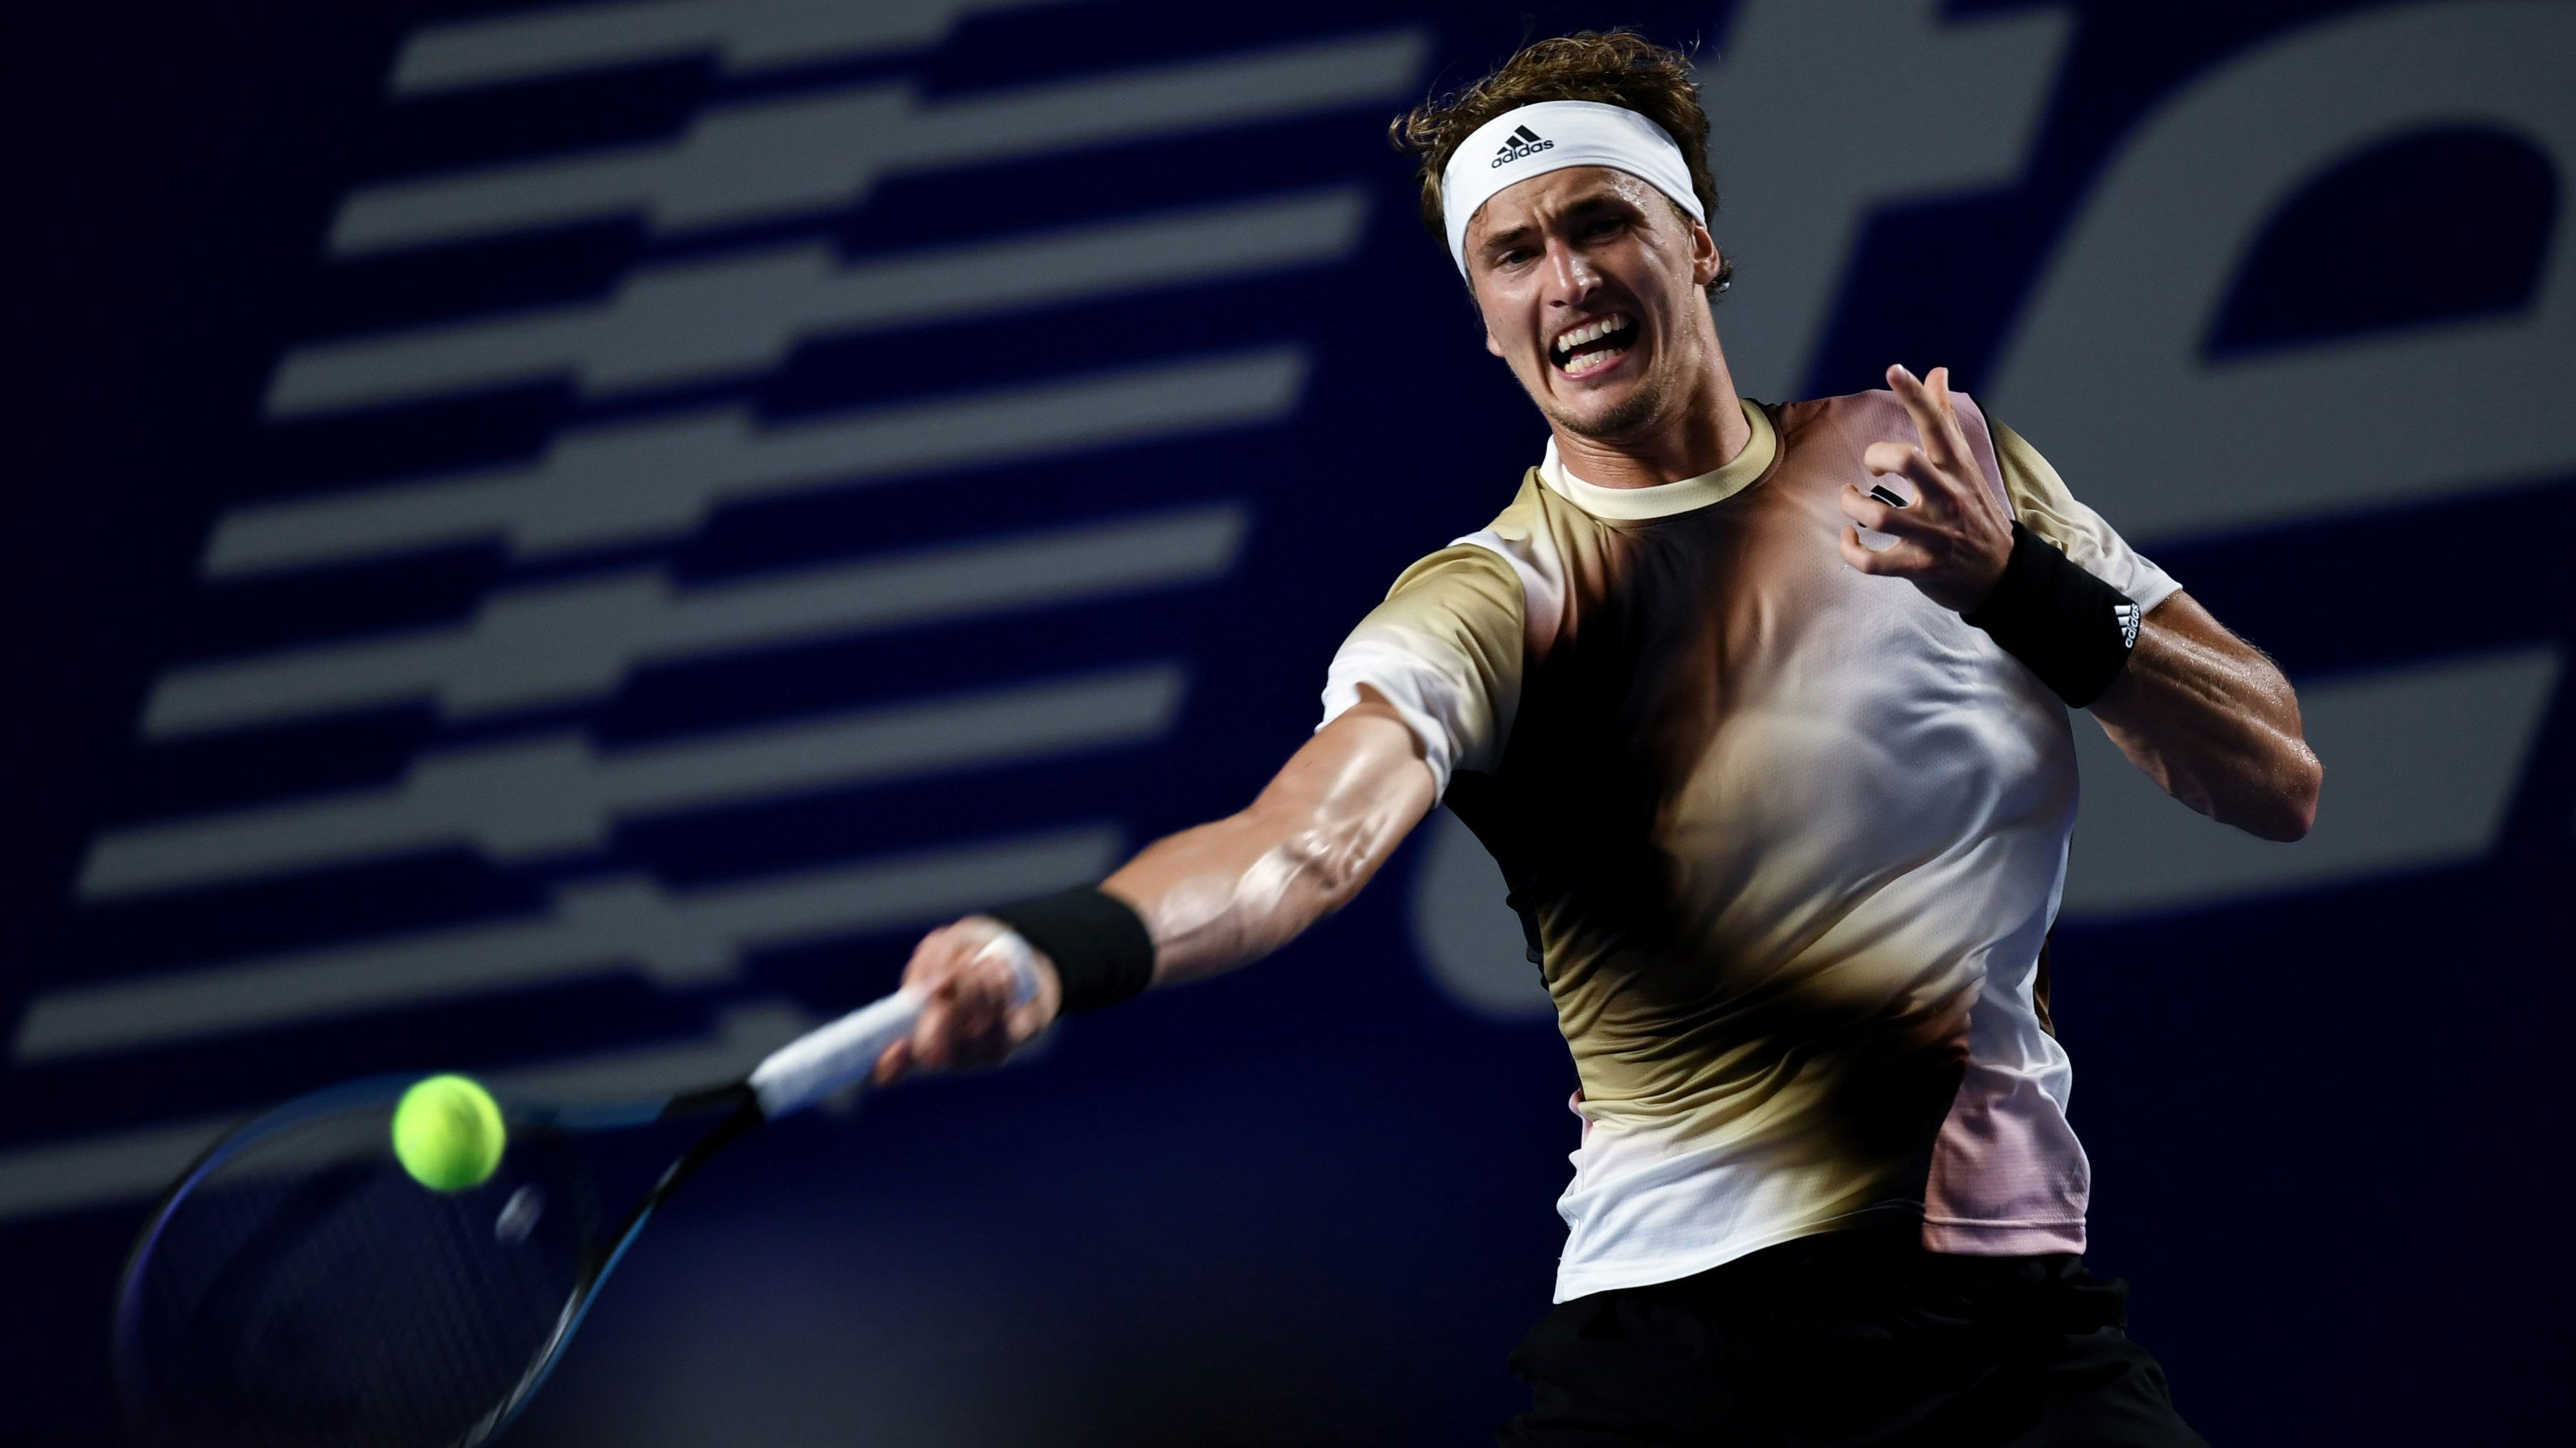 Alexander Zverev of Germany hits a return during men&#x27;s singles first round match against Jenson Brooksby of the United States at the 2022 ATP Mexican Open tennis tournament in Acapulco, Mexico, Feb. 22, 2022. (Photo by Xin Yuewei/Xinhua via Getty Images)